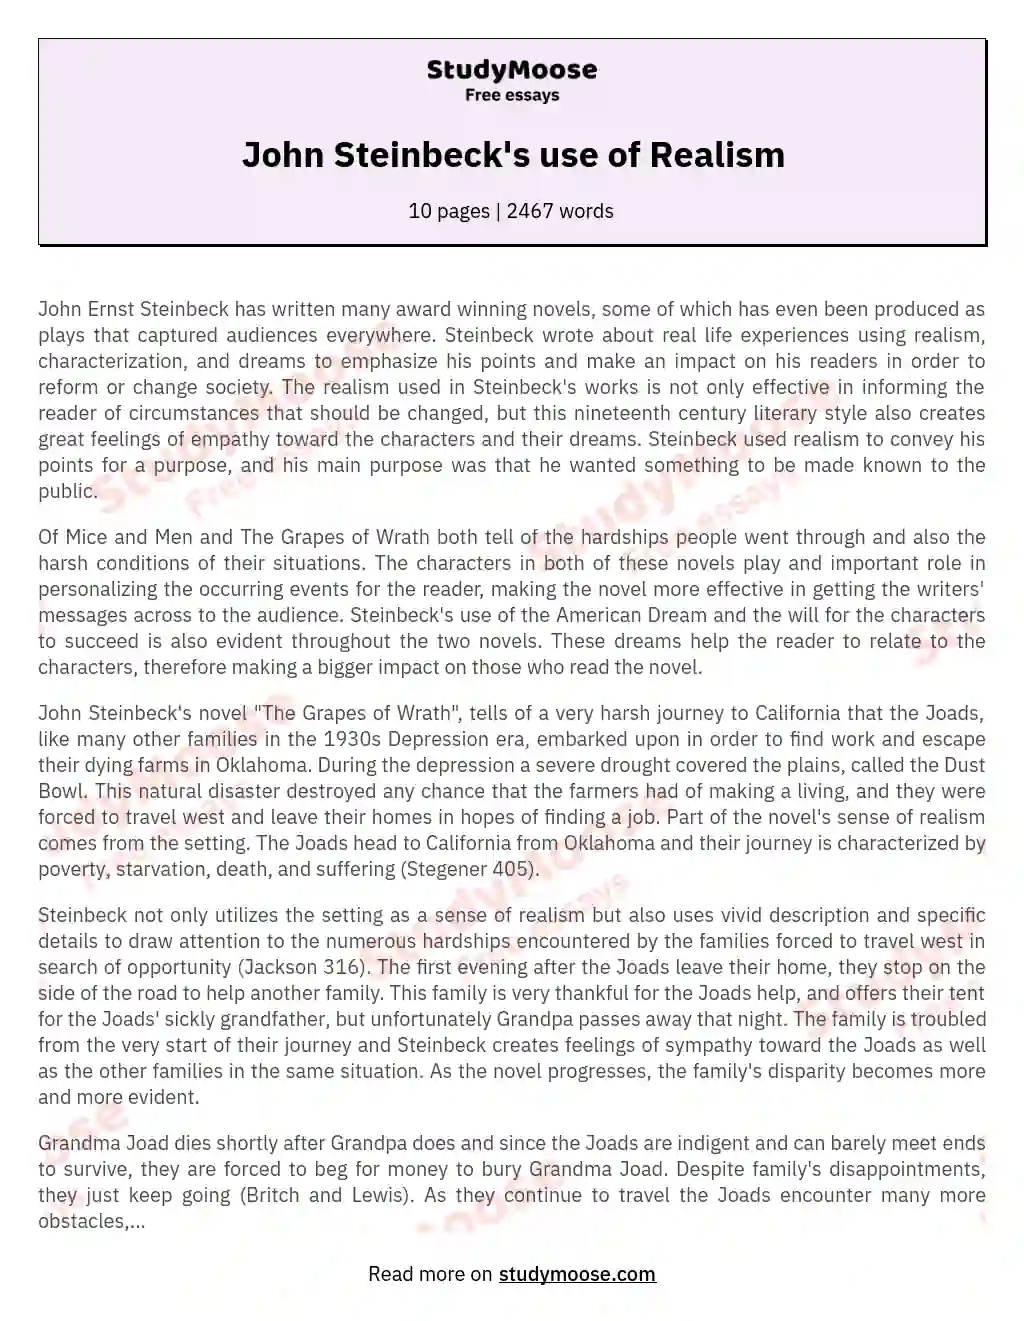 John Steinbeck's use of Realism essay